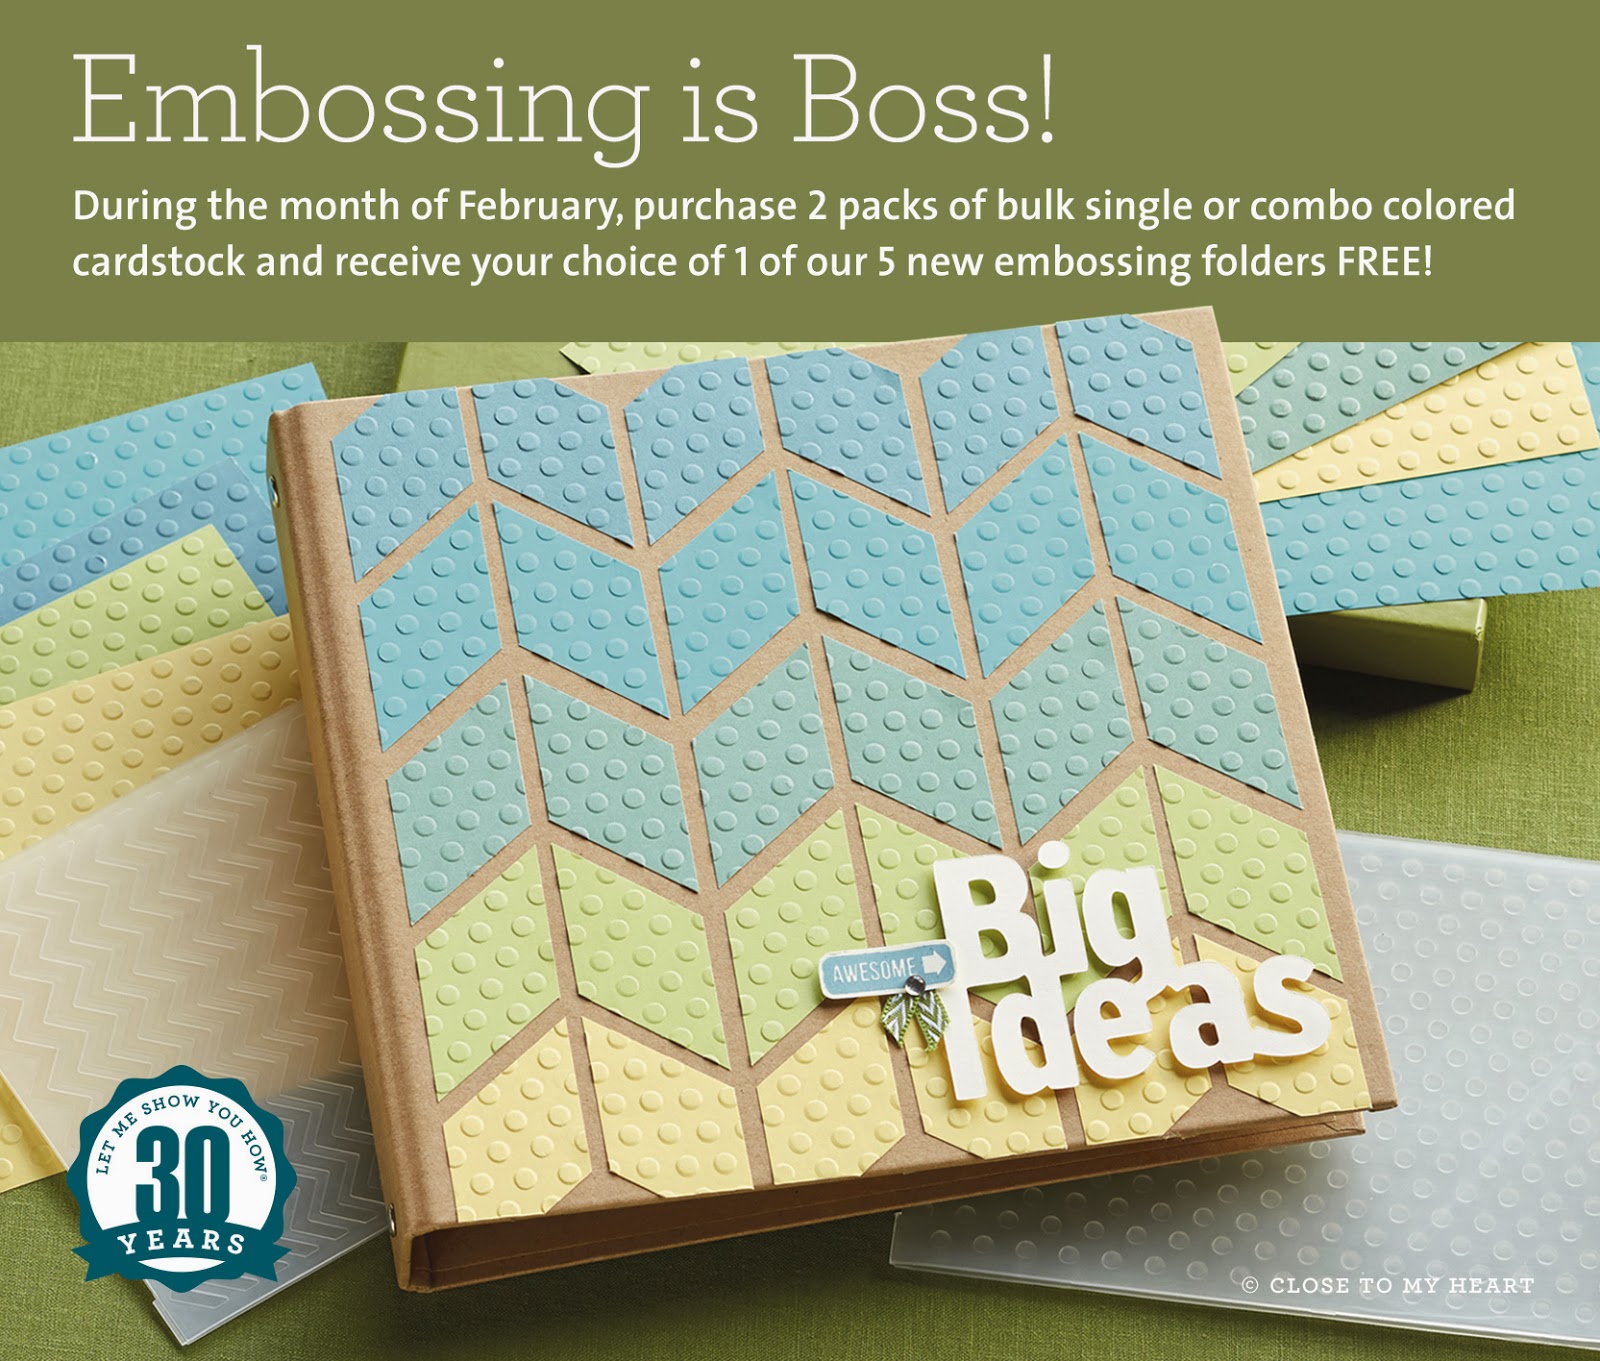 http://jaymamalme.ctmh.com/ctmh/promotions/campaigns/1402-embossing-is-boss.aspx